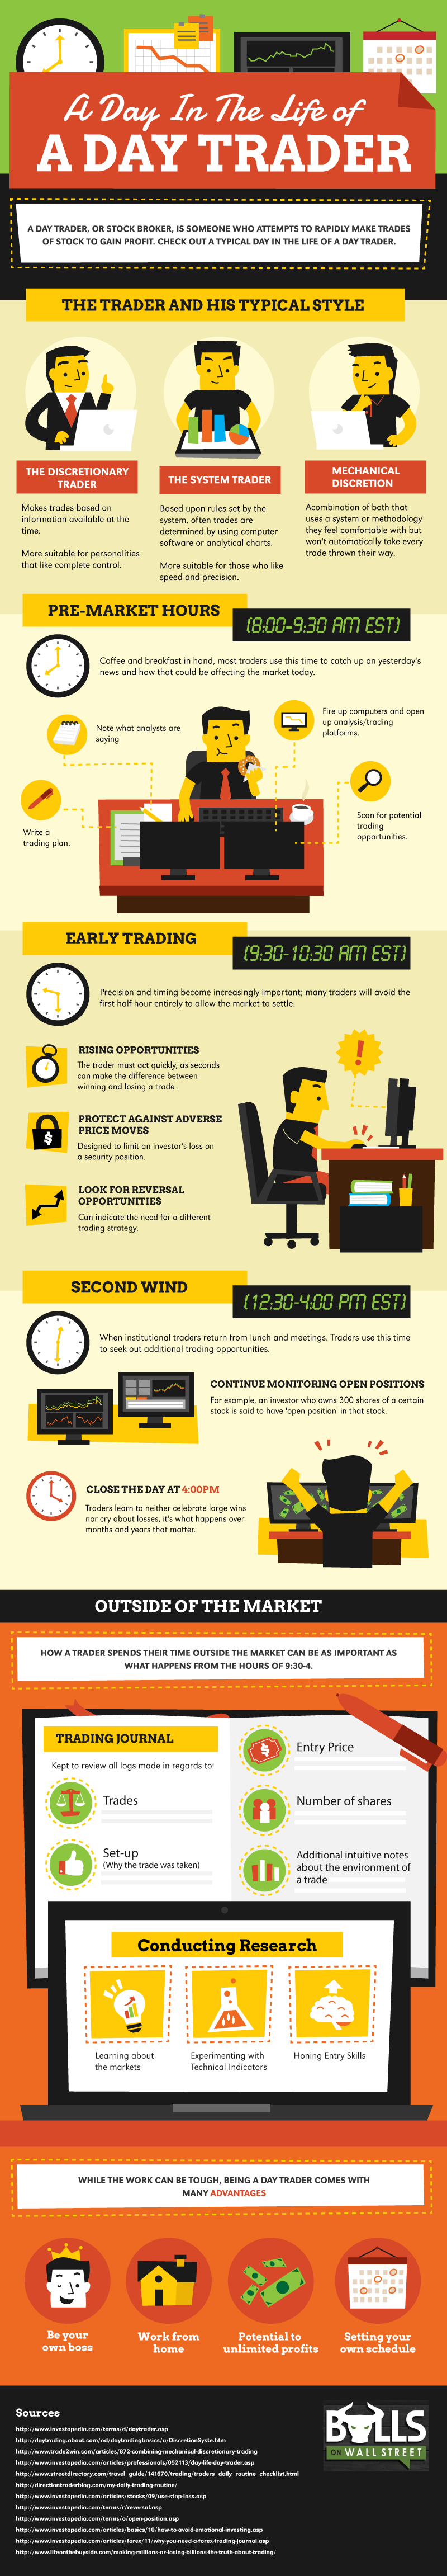 a-day-in-the-life-of-a-day-trader-infographic